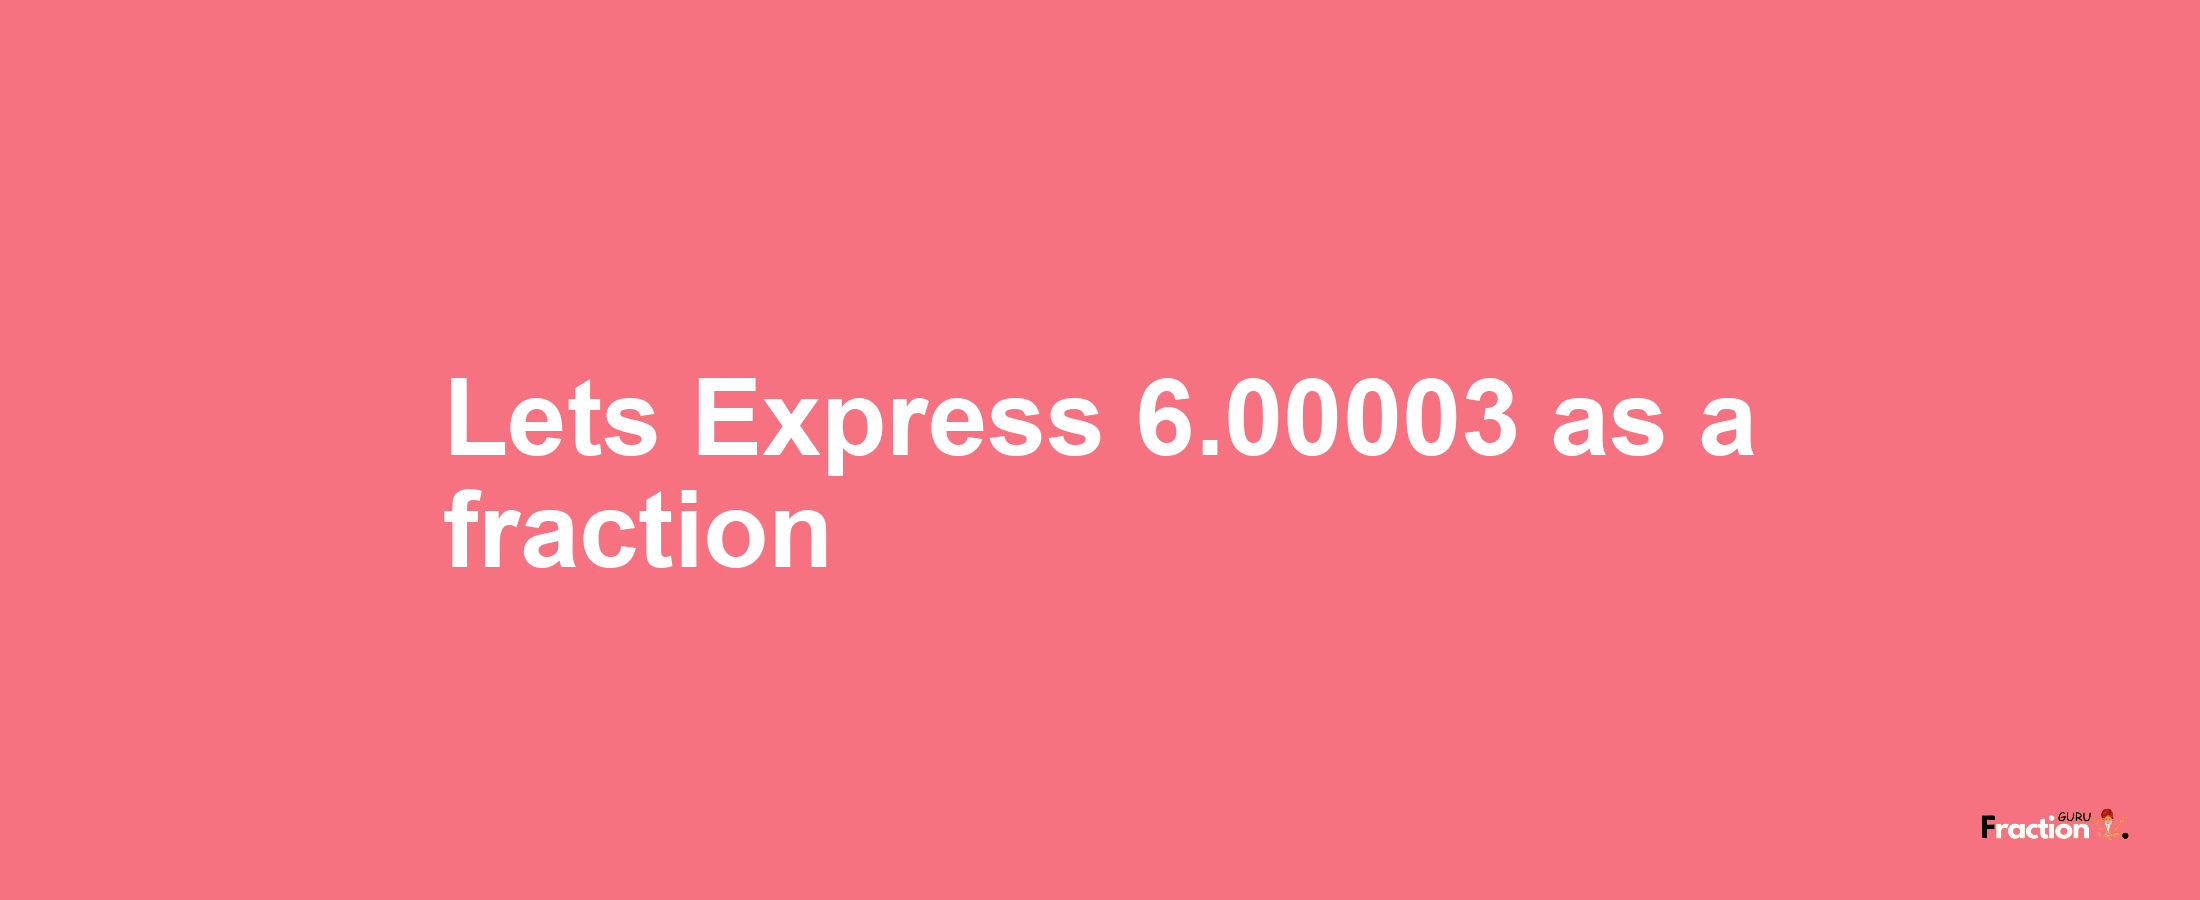 Lets Express 6.00003 as afraction